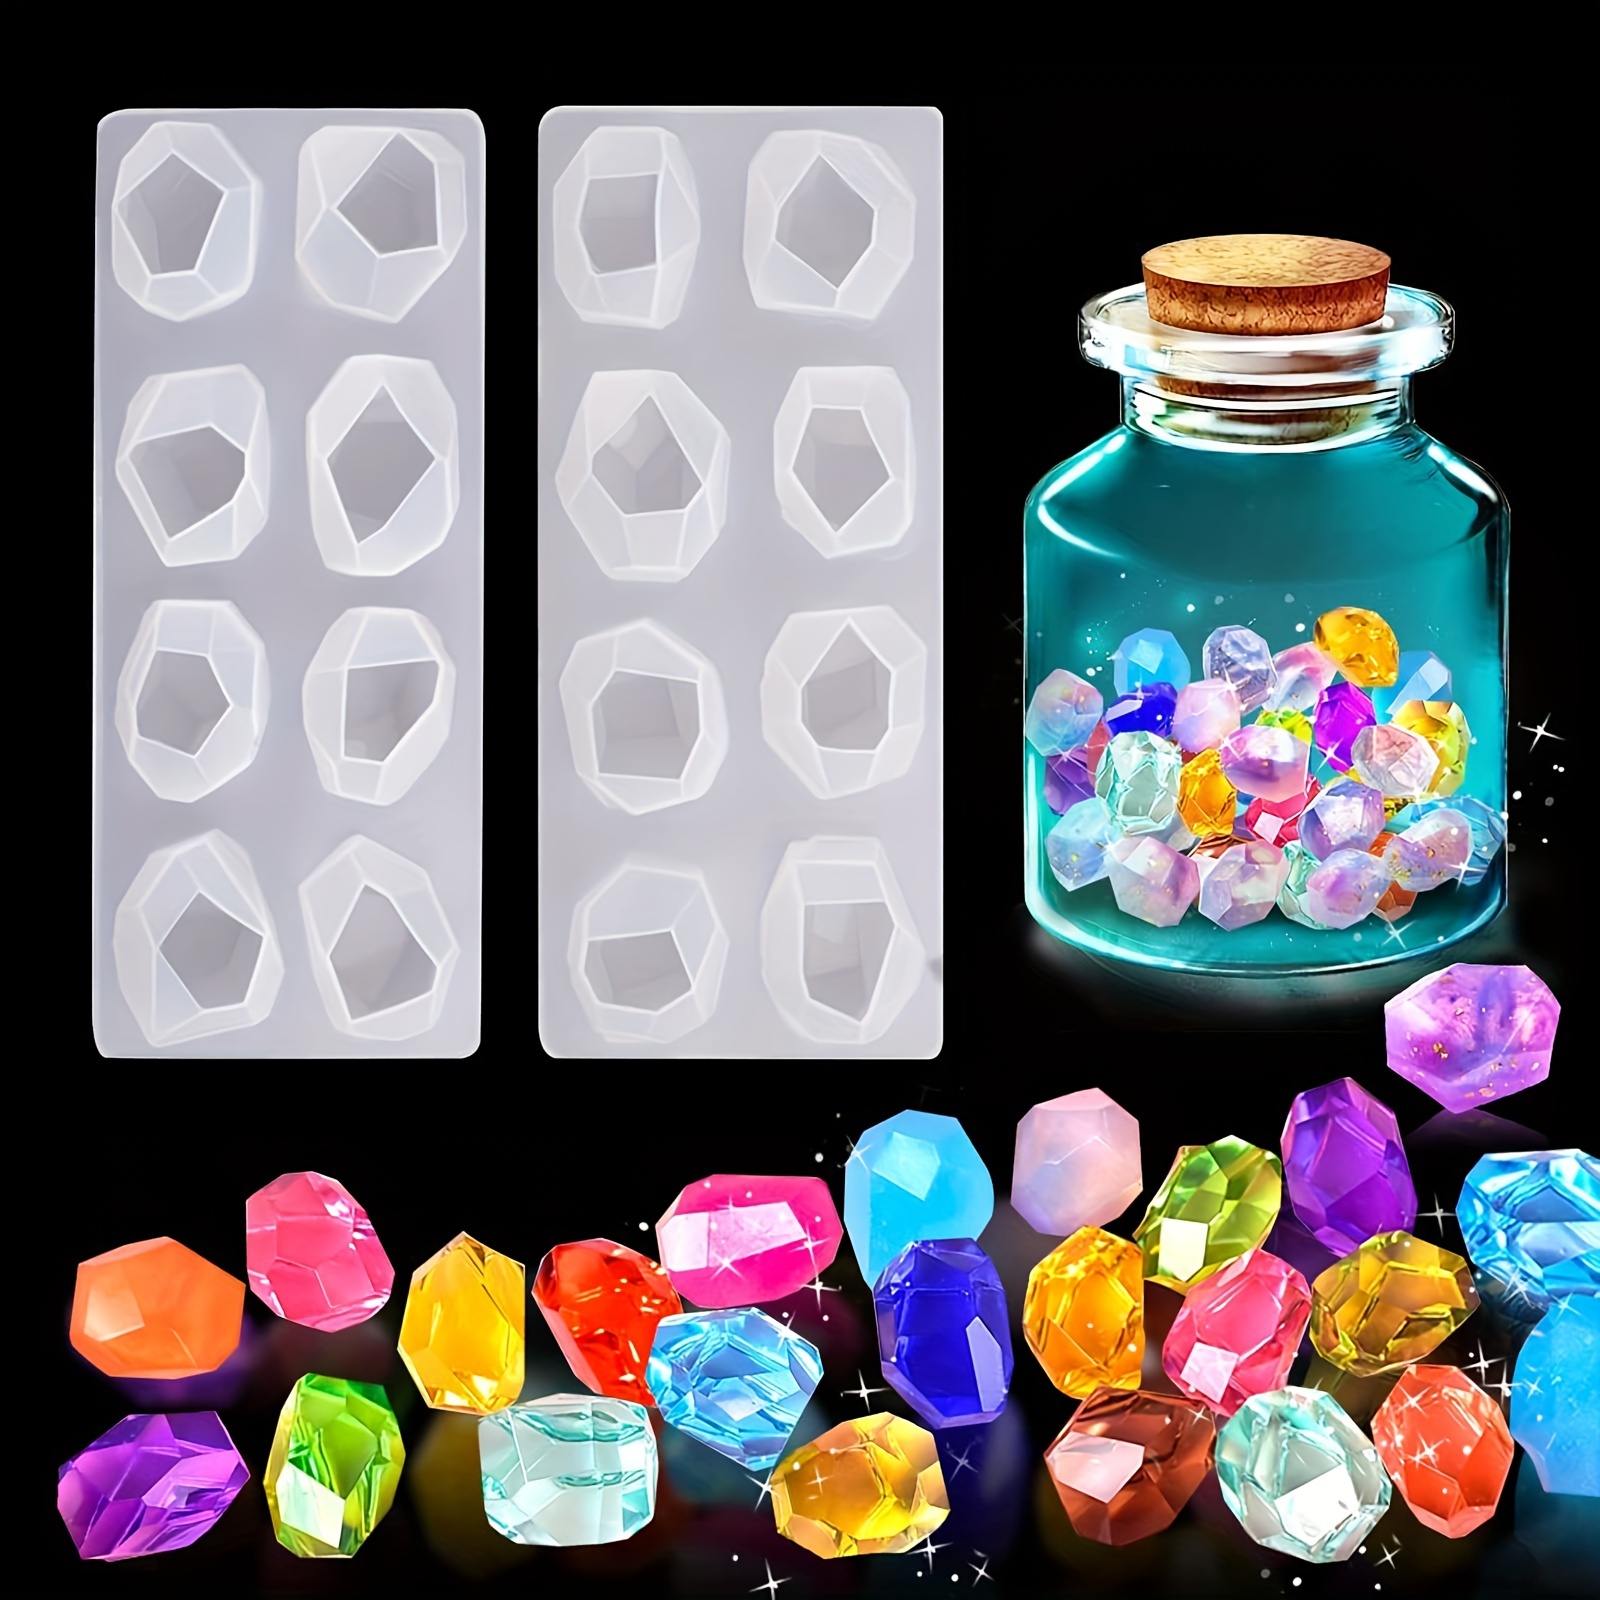 

2 Styles Geometric Resin Molds Crystal Silicone Mold Gemstone Casting Jewelry Mould Reusable Irregular Epoxy Moulds Diy Craft Making Pendant Home Wedding Ceremony Graduation Decor